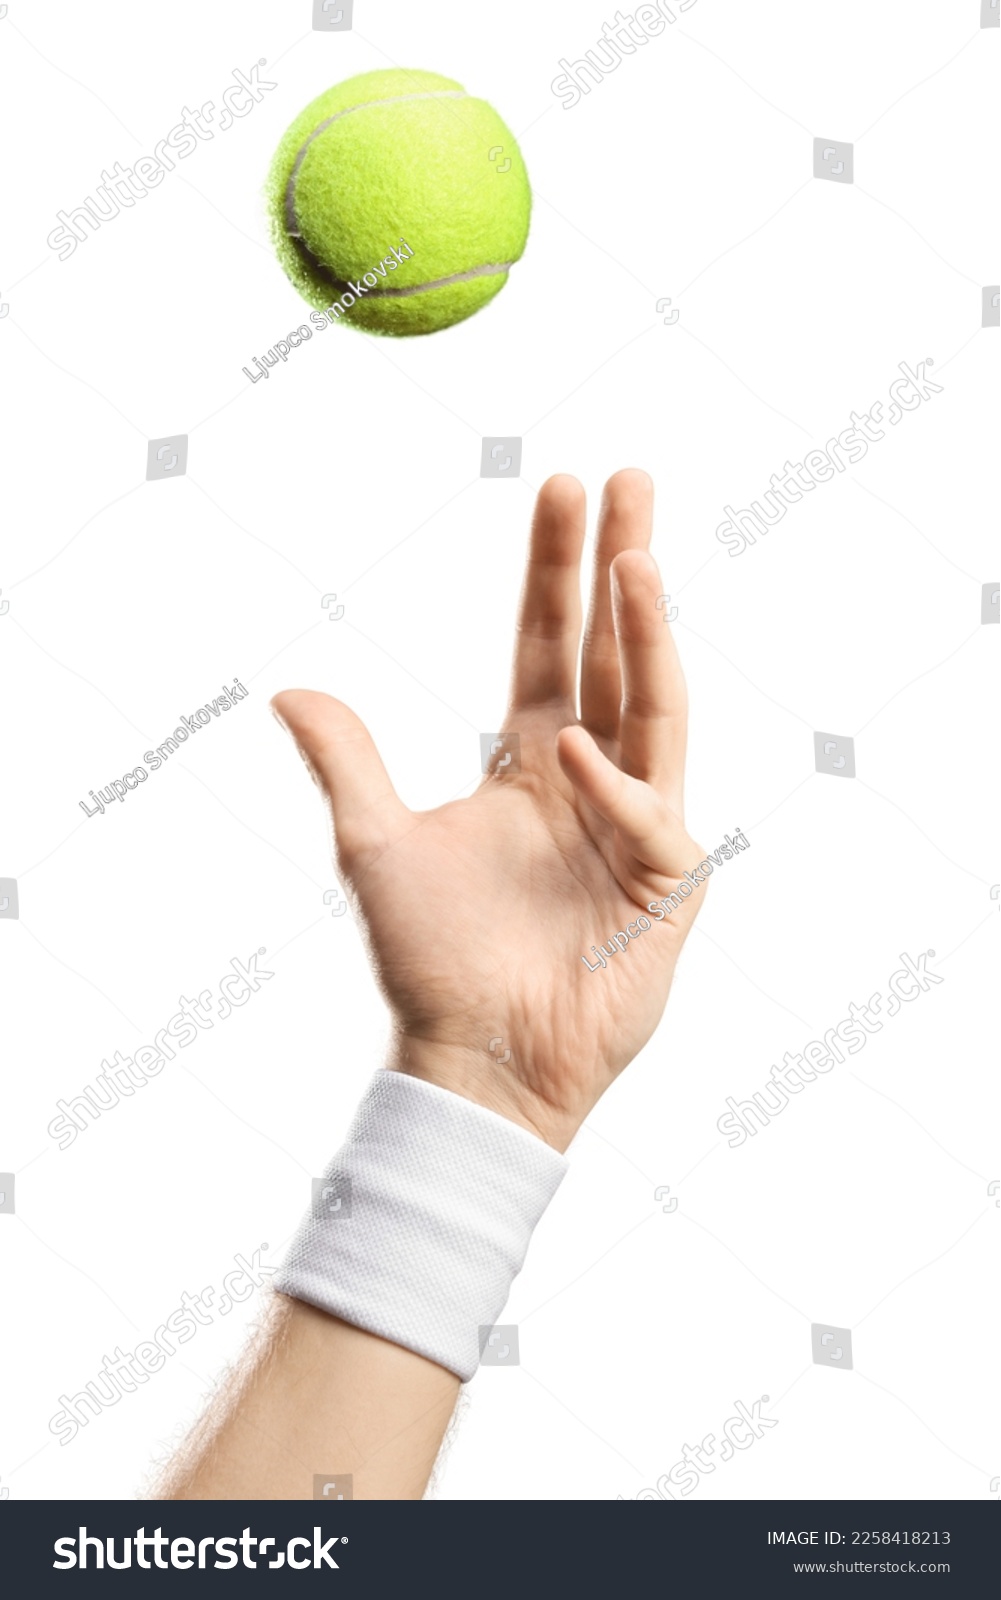 Male hand with a wristband throwing a tennis ball isolated on white background #2258418213